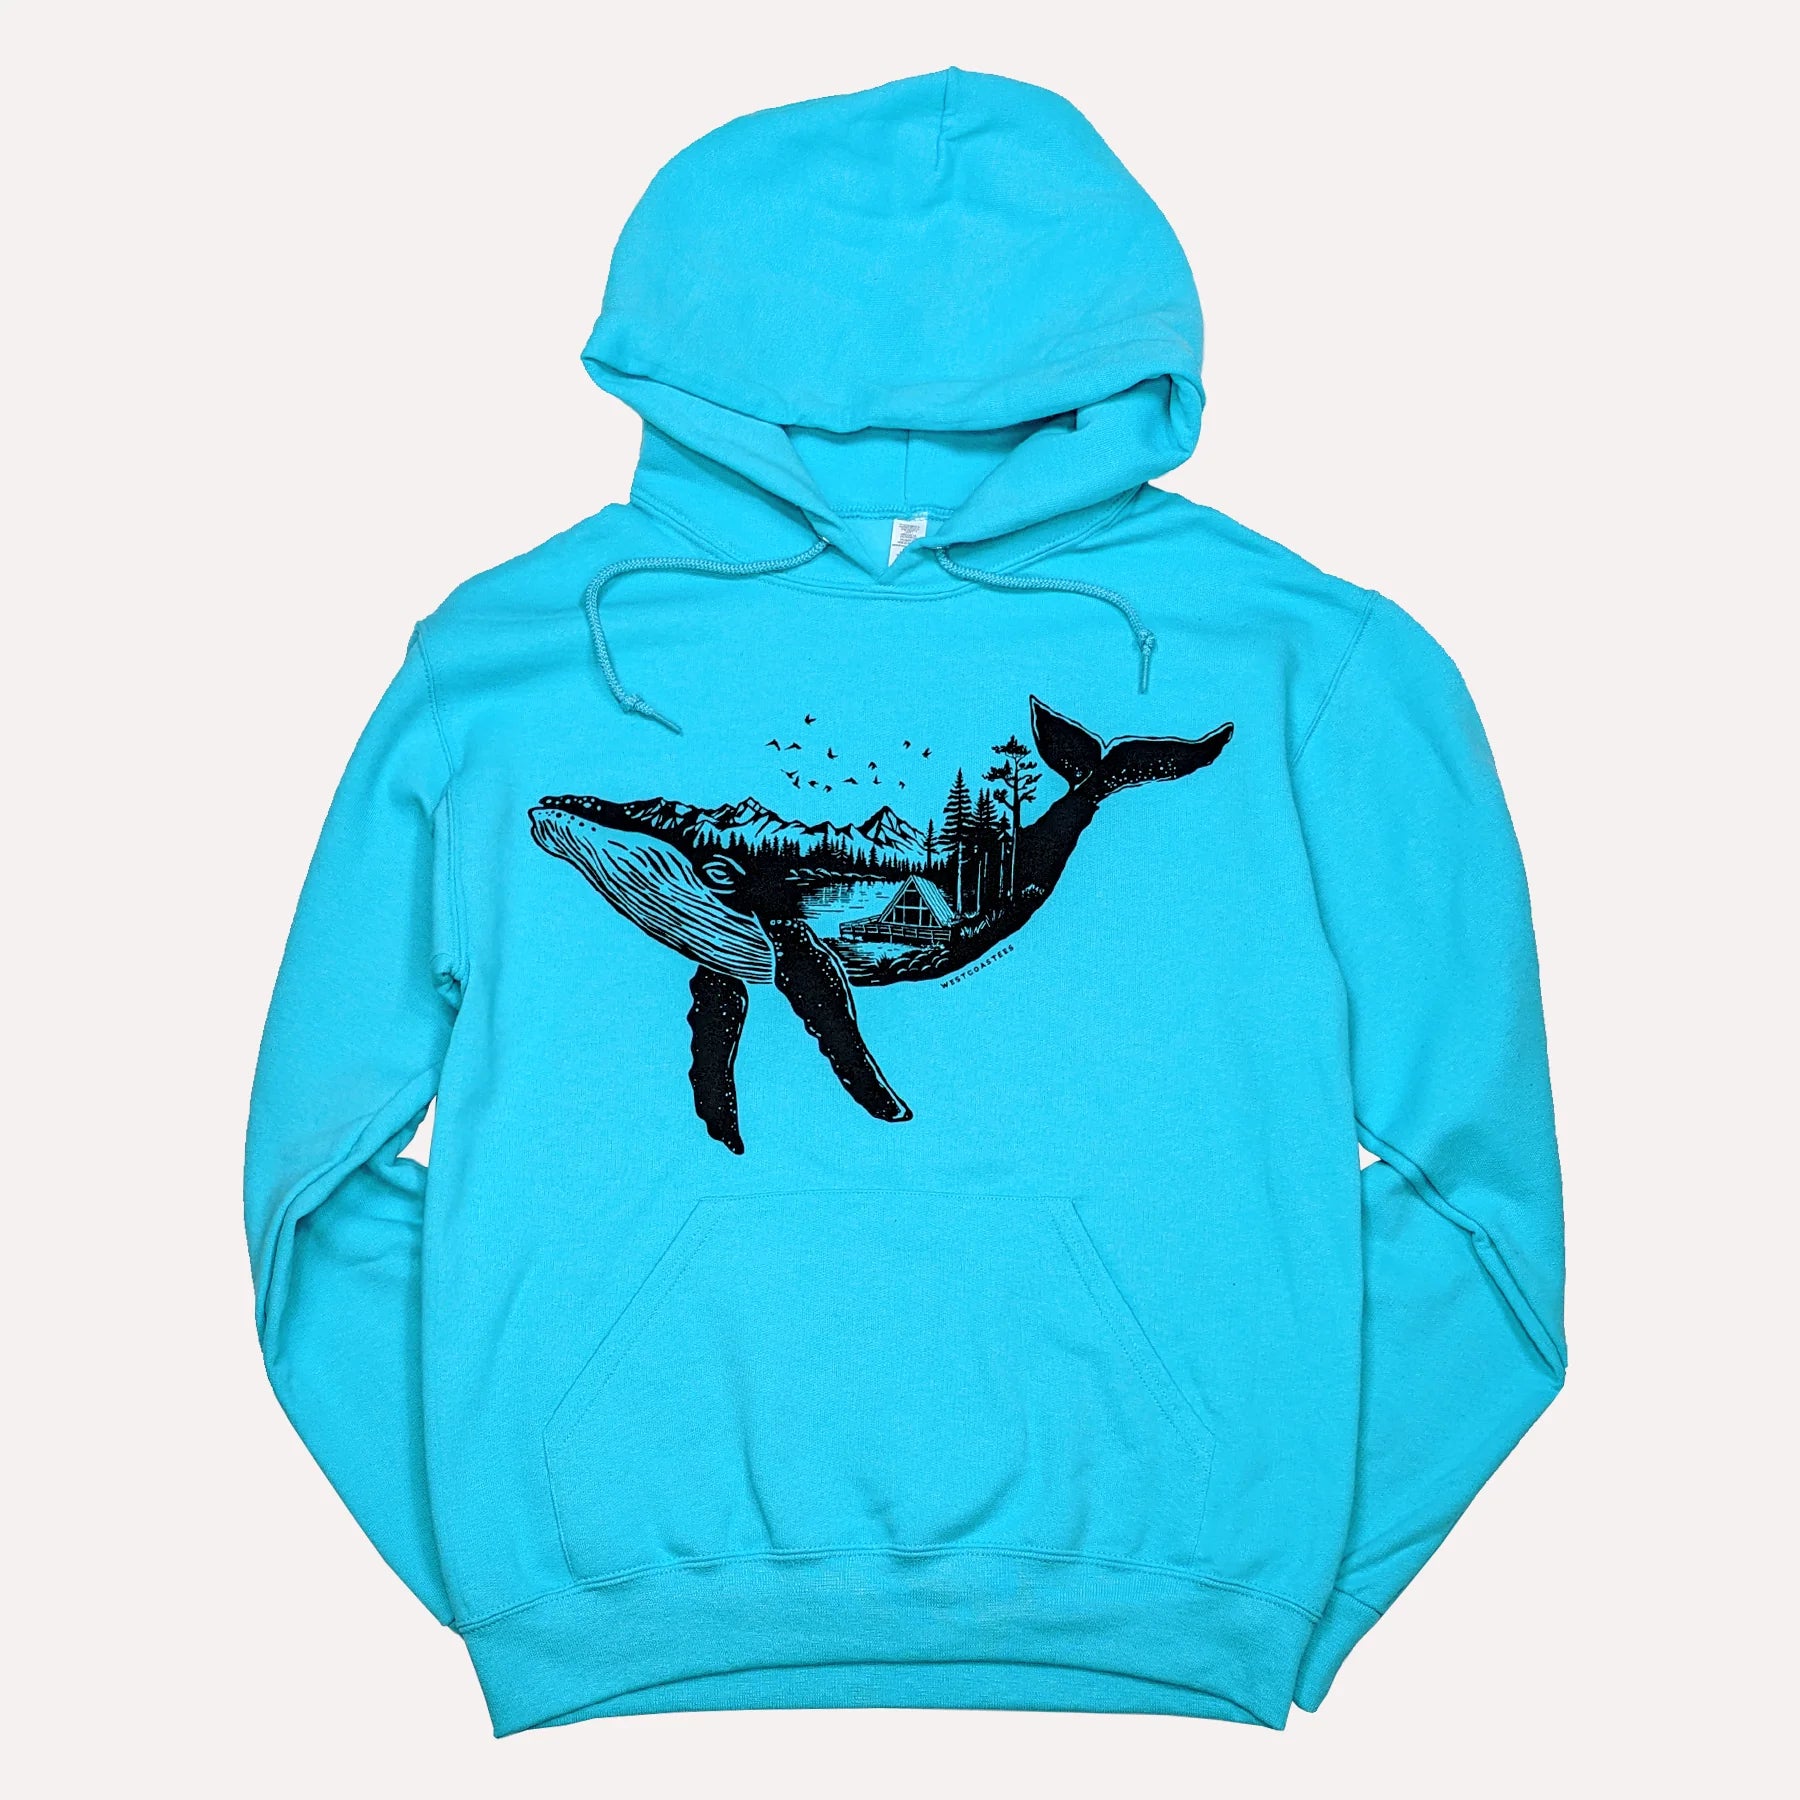 Westcoastees A Frame Whale Hoodie Ocean Blue - Westcoastees A Frame Whale Hoodie Ocean Blue -  - House of Himwitsa Native Art Gallery and Gifts